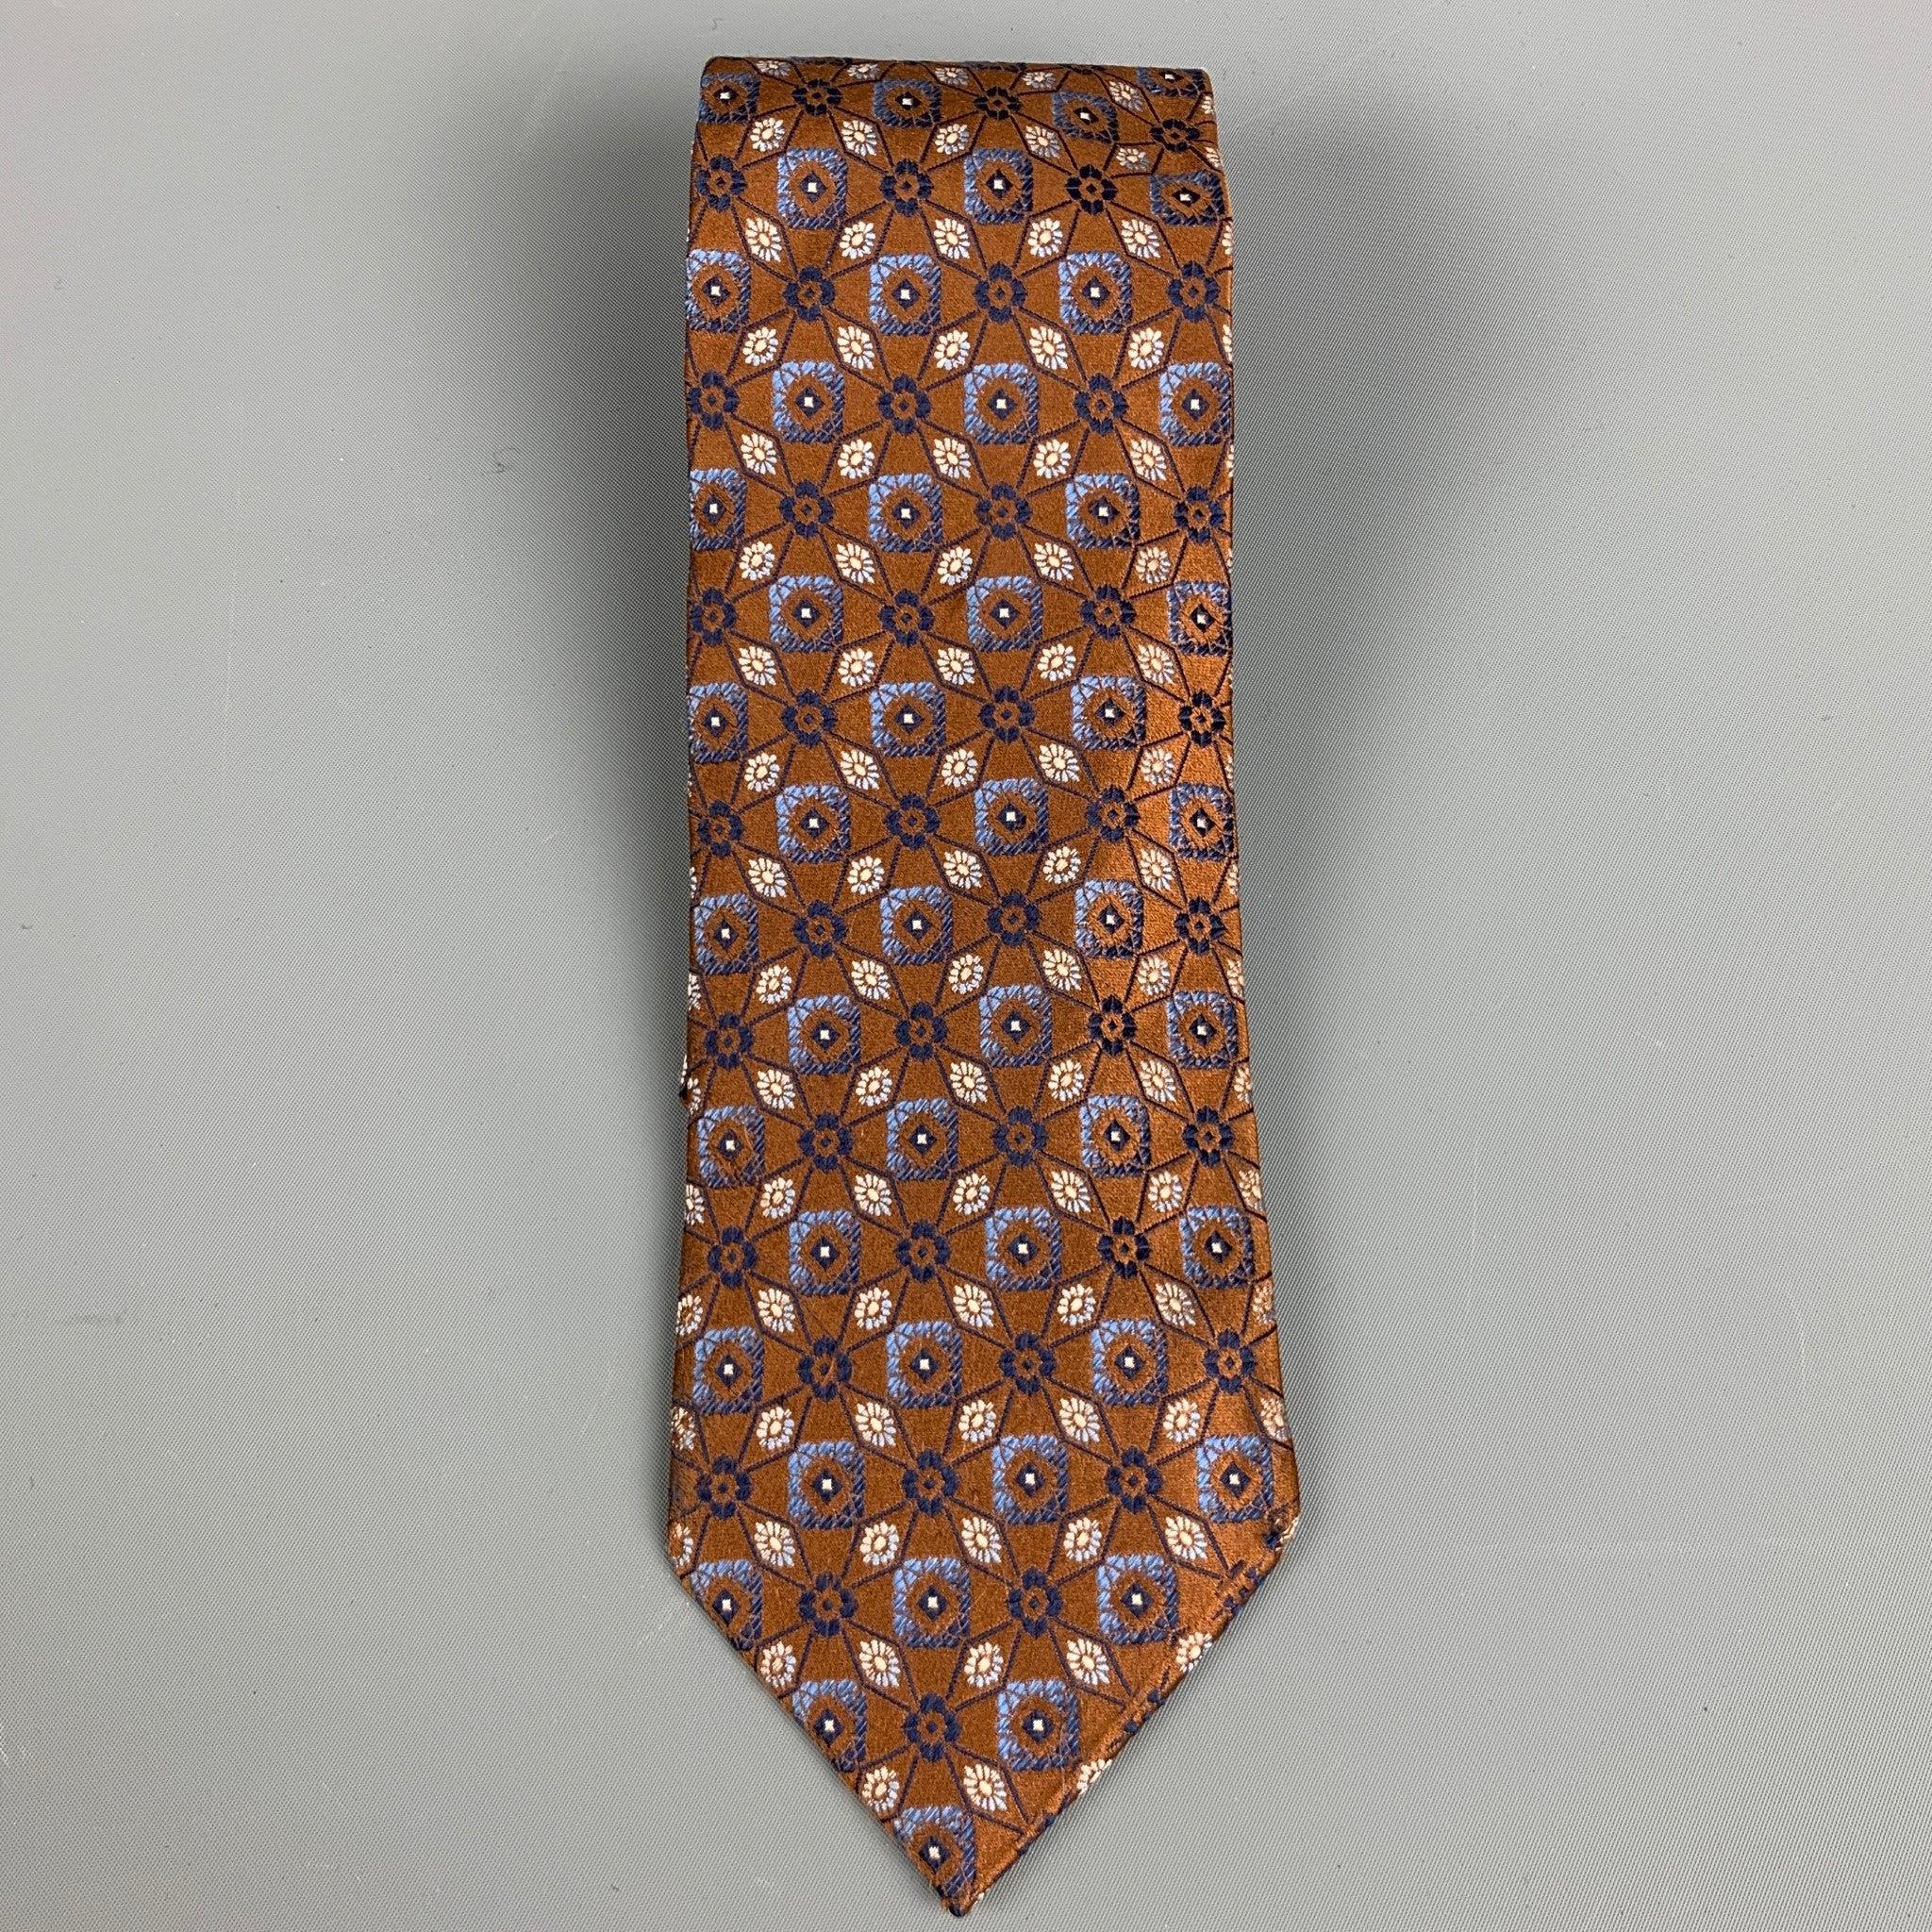 ERMENEGILDO ZEGNA
necktie in a brown silk fabric featuring navy abstract floral jacquard. Made in Italy.Excellent Pre-Owned Condition. 

Measurements: 
  Width: 3.5 inches Length: 60 inches 
  
  
Reference: 128082
Category: Tie
More Details
   